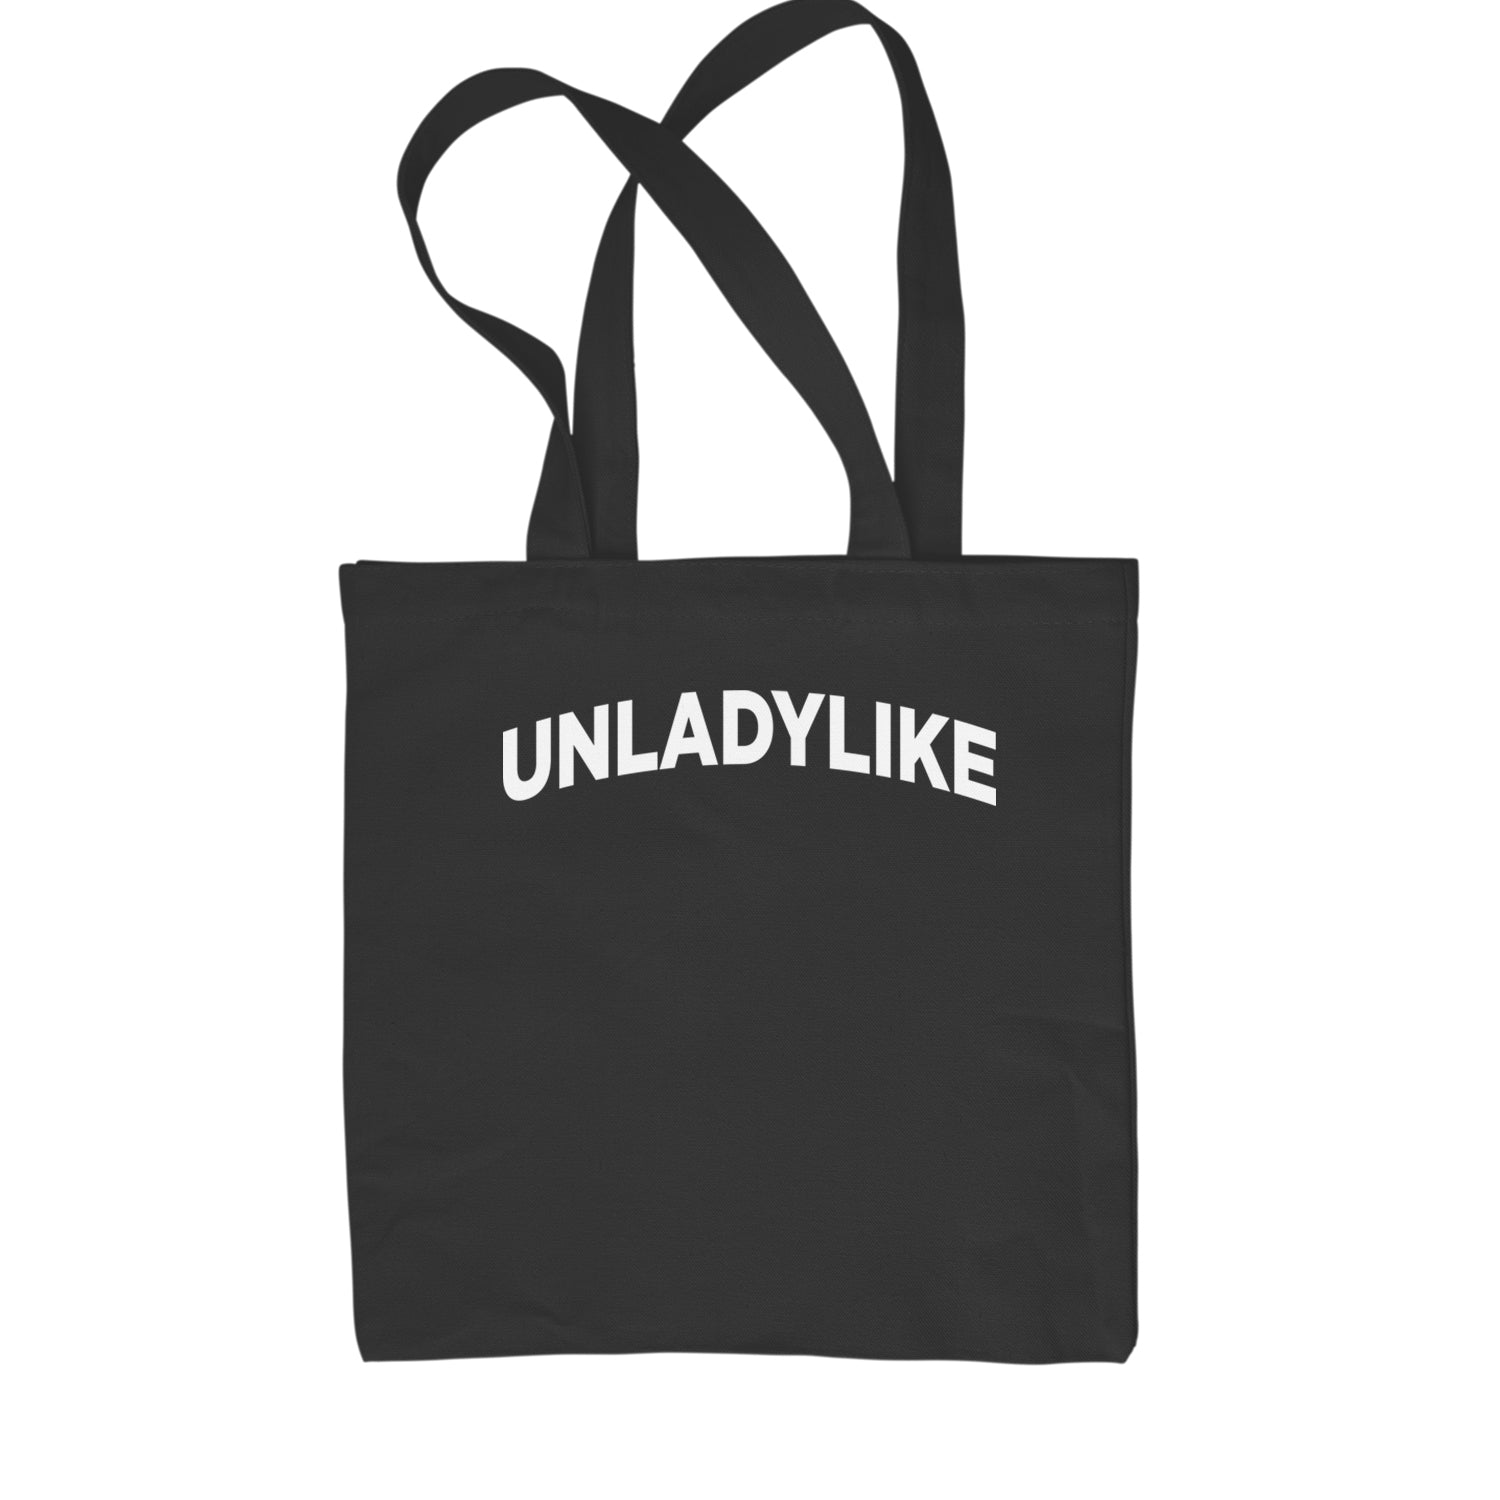 Unladylike Embrace Your Unique Strength Shopping Tote Bag